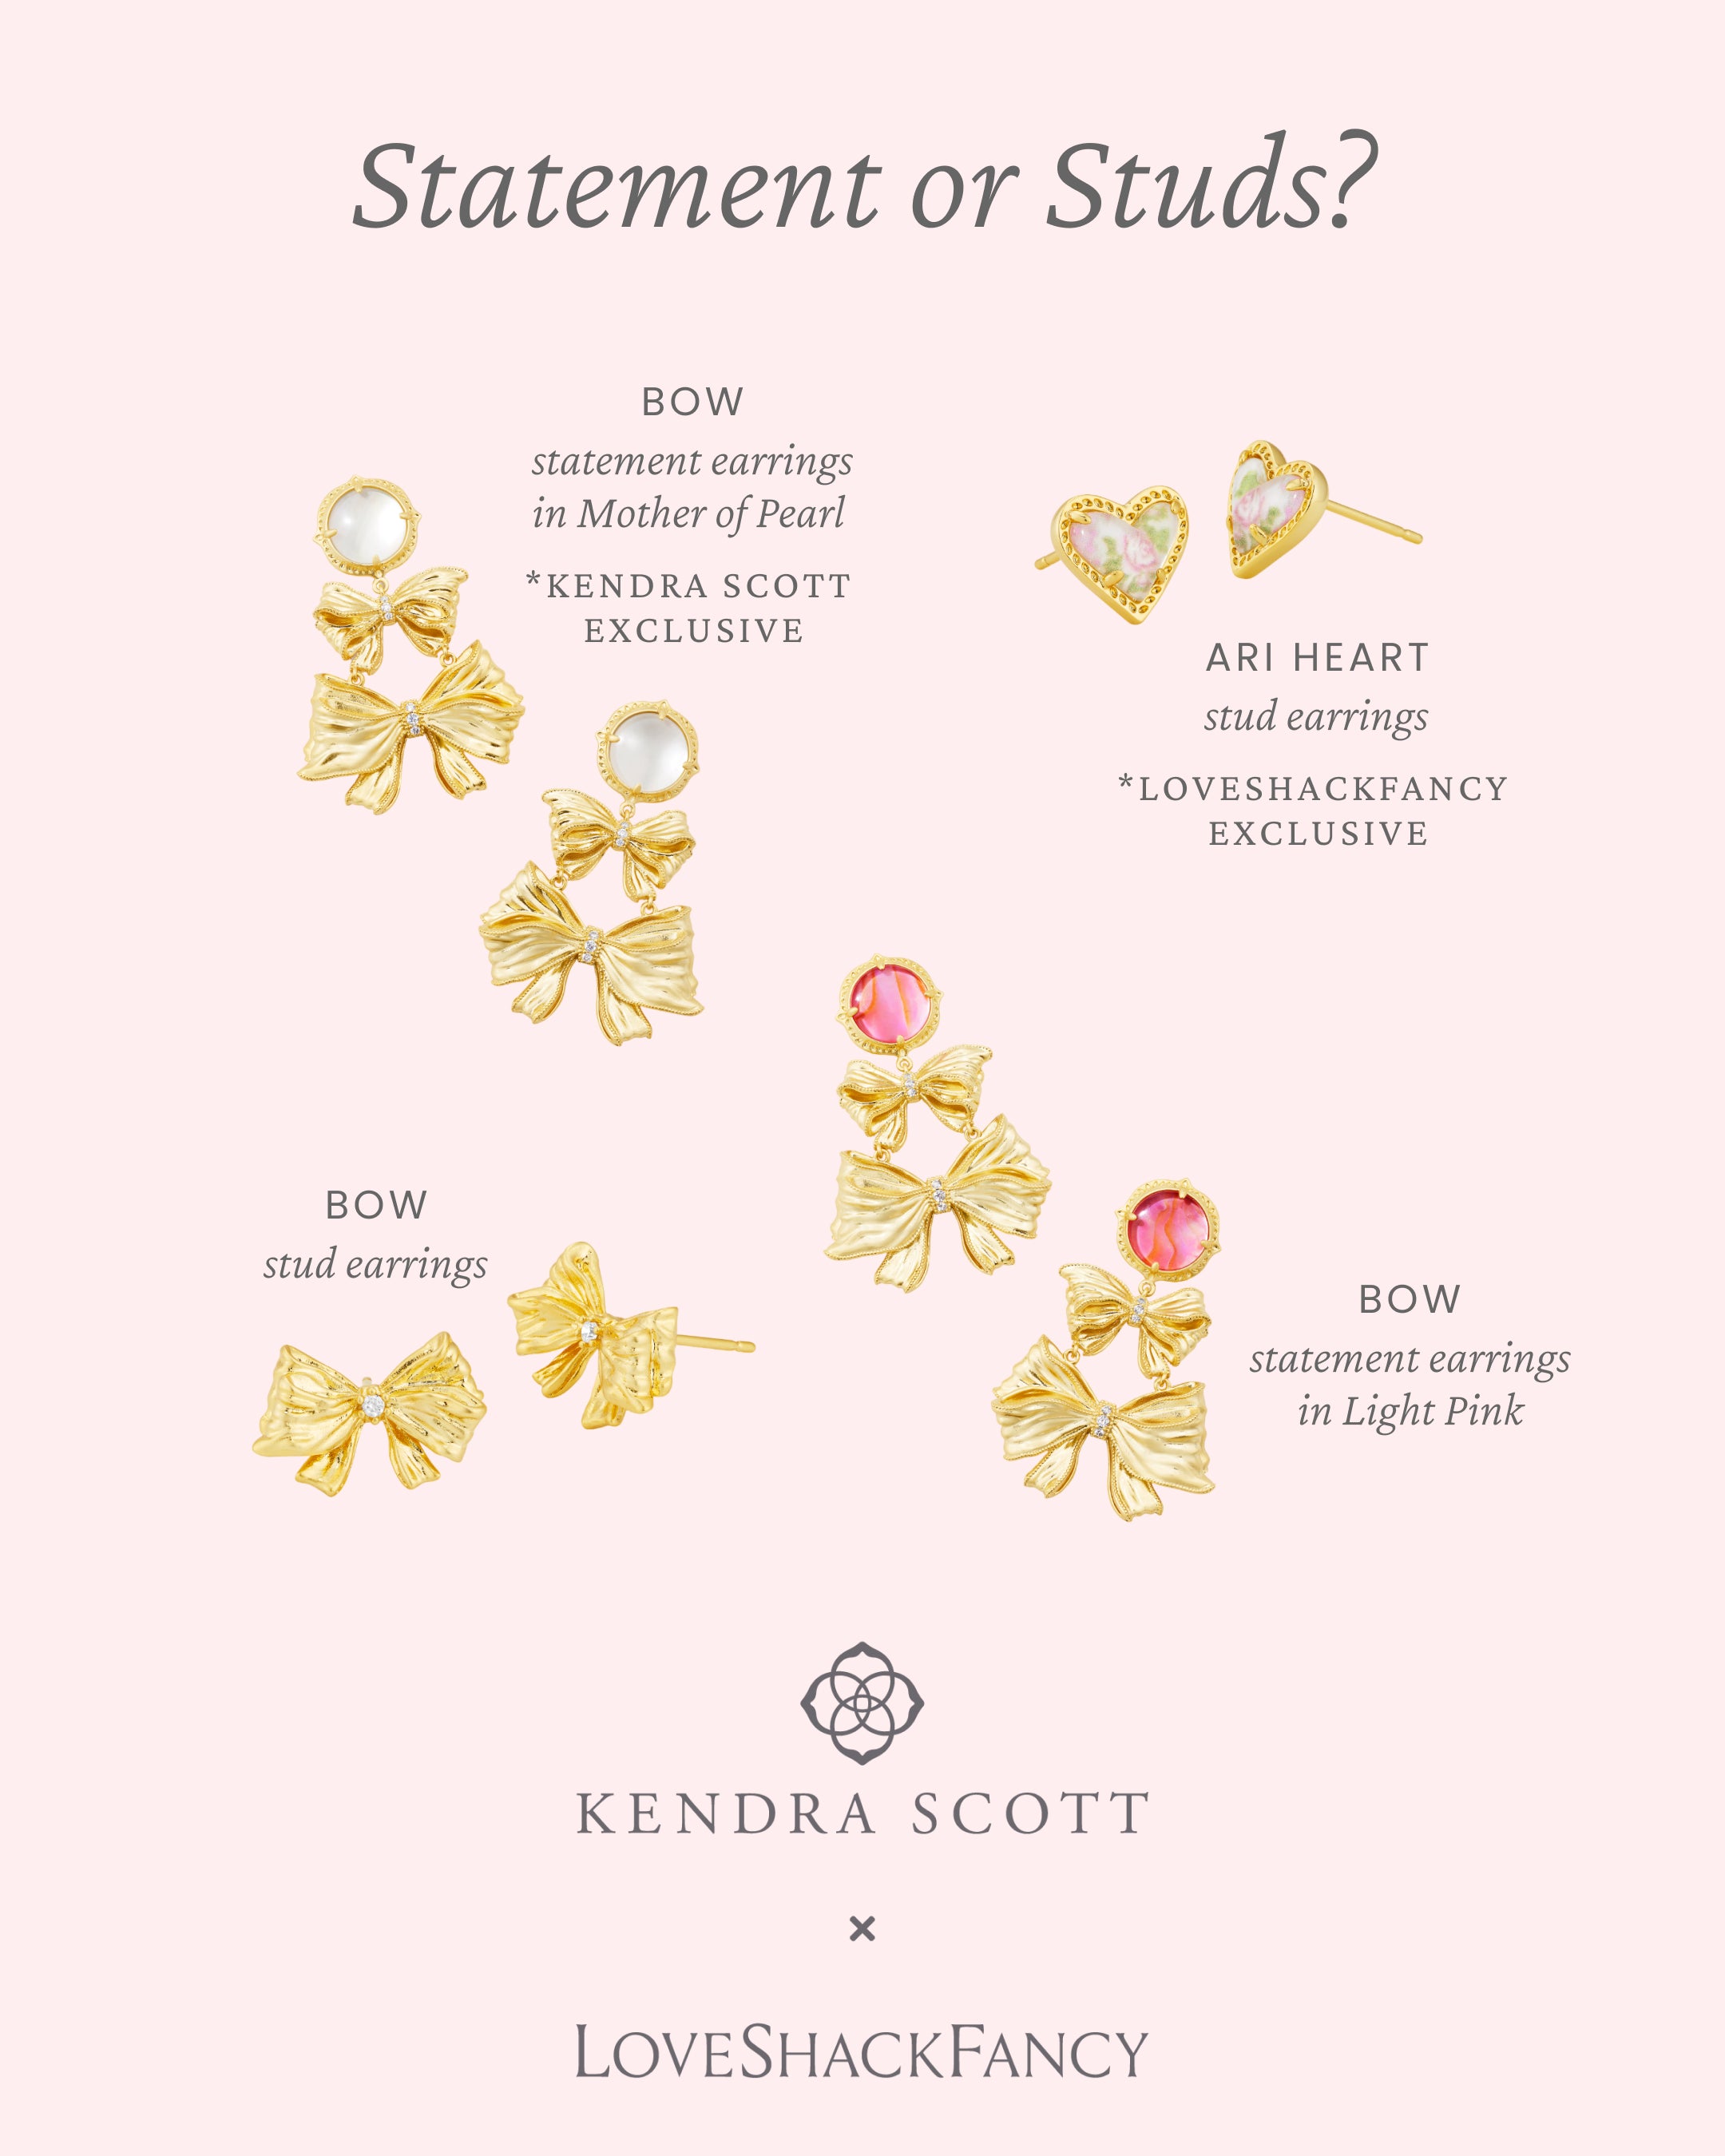 Four sets of gold earrings from the Kendra Scott x LoveShackFancy collaboration